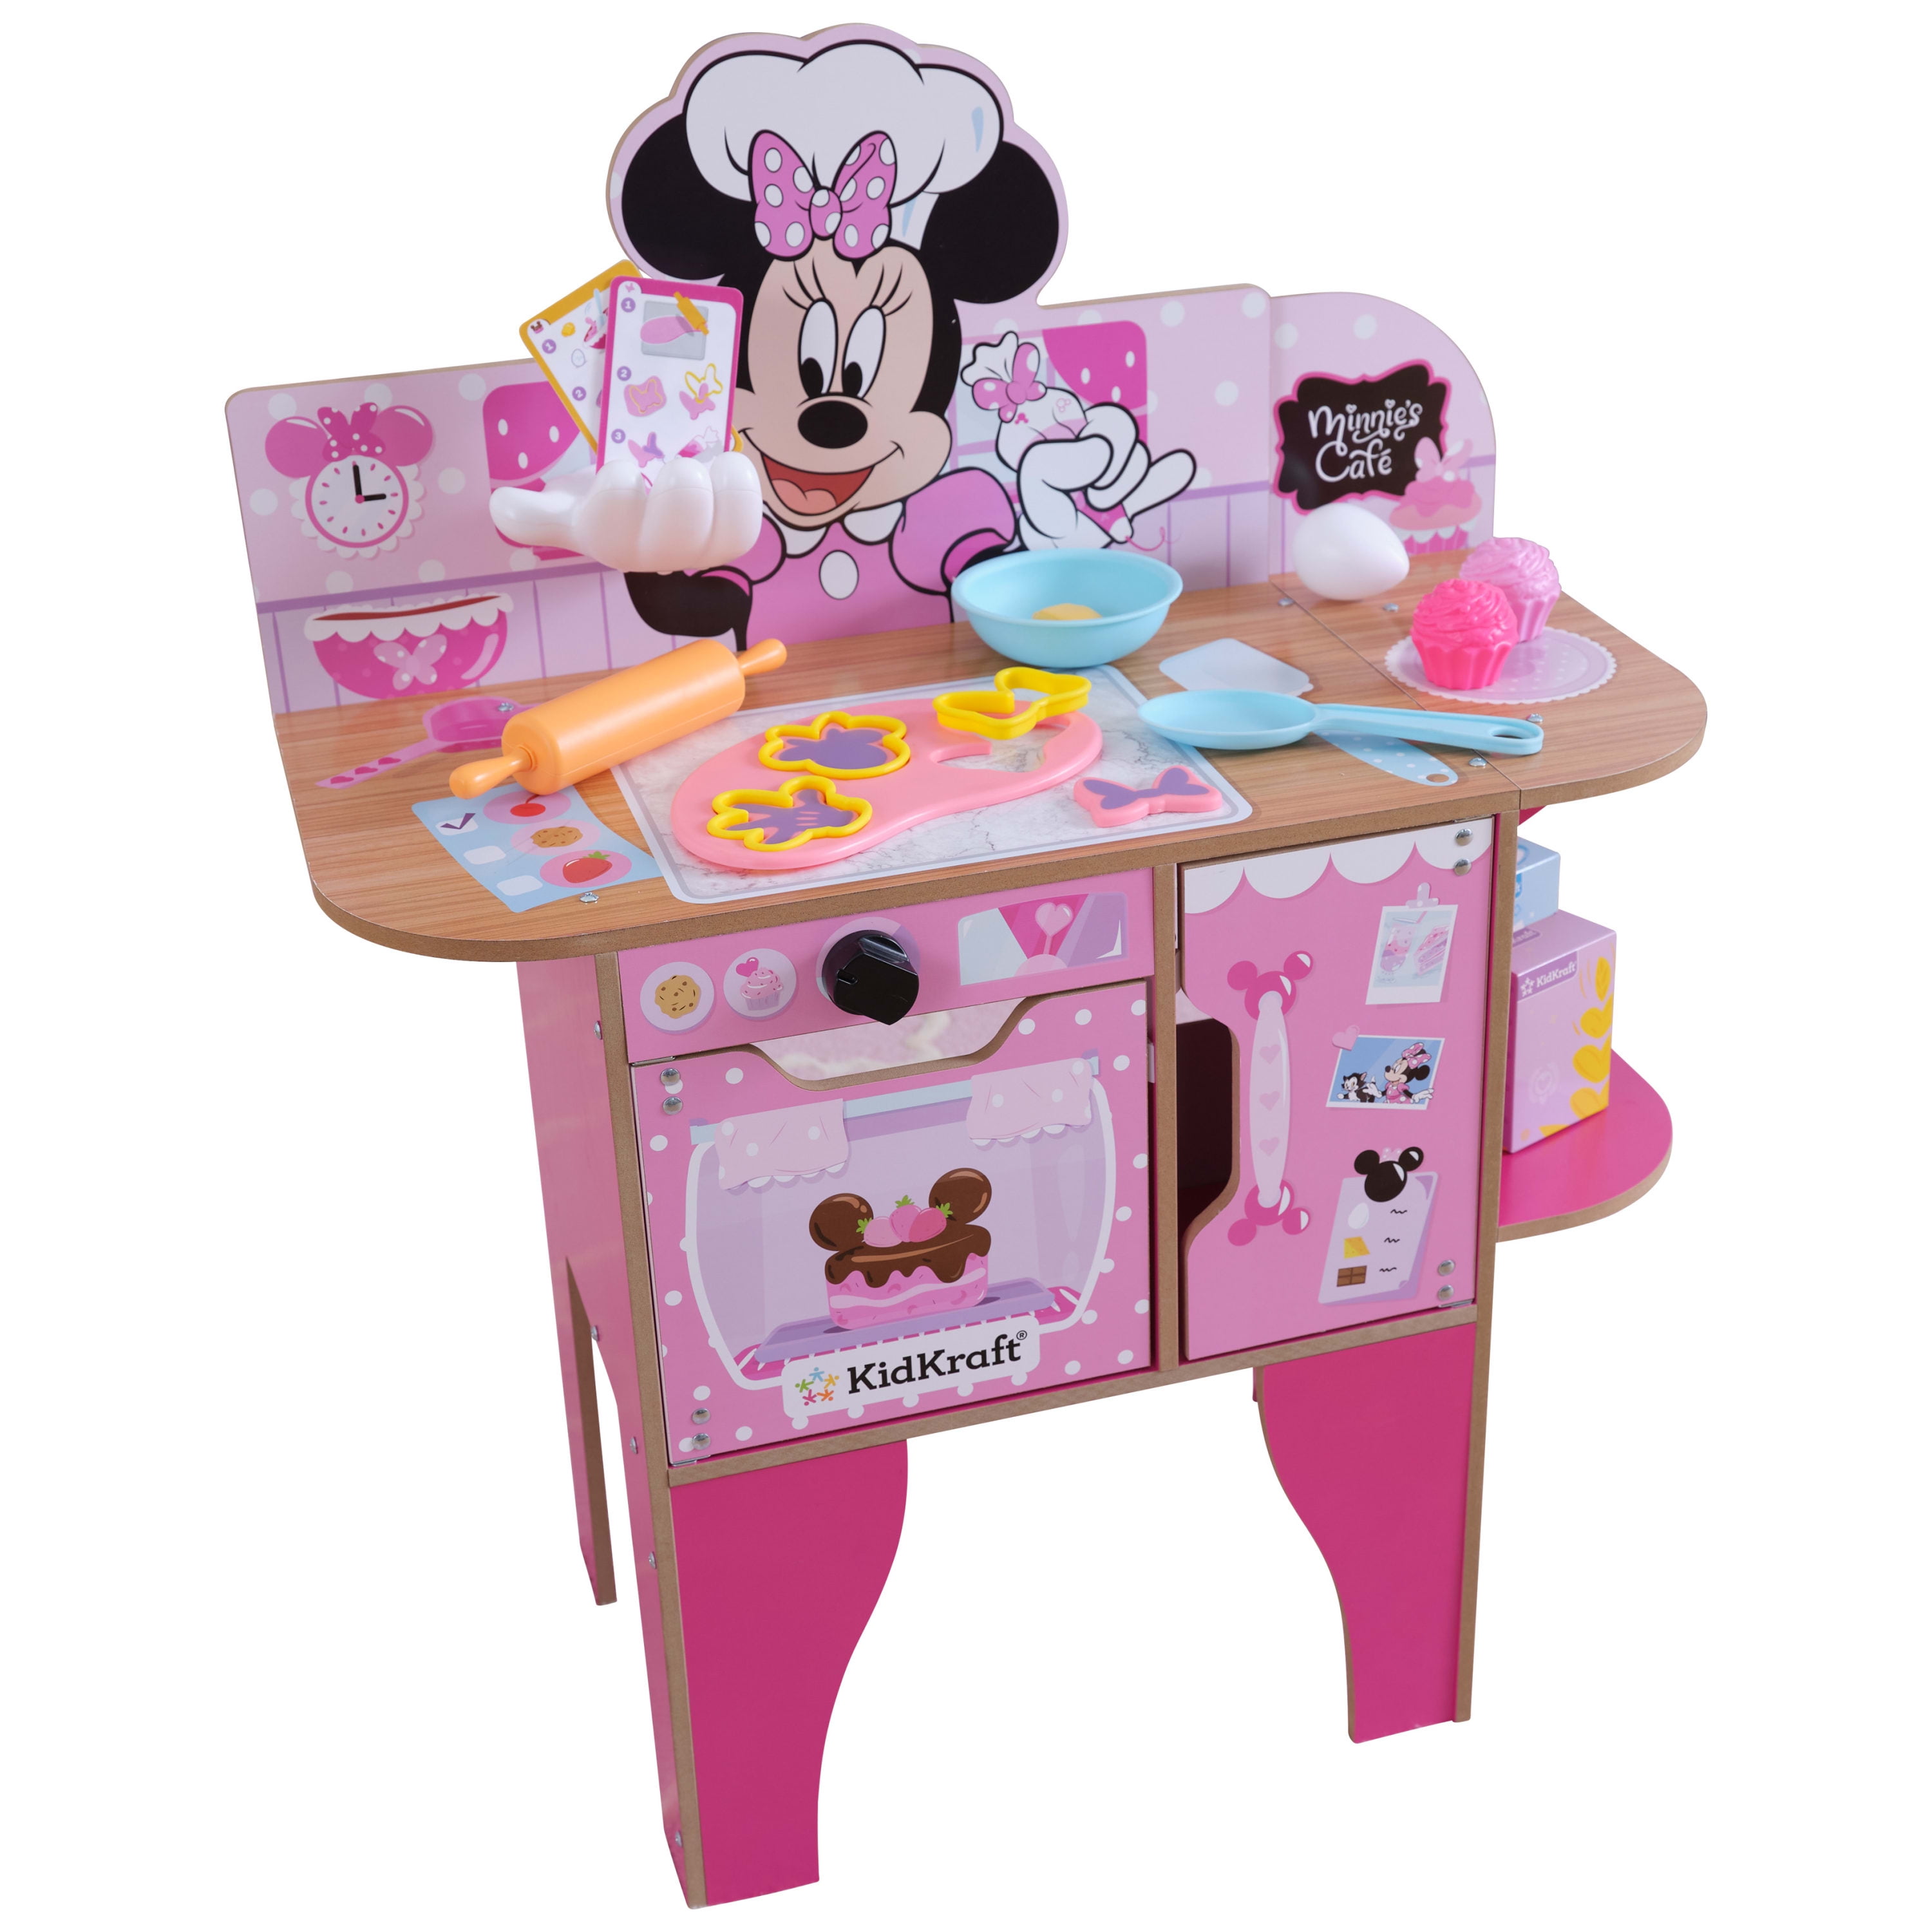 KidKraft Minnie Mouse Wooden Bakery & Cafe Toddler Play Kitchen w/ 18 Accessories $39.97 & More + Free Shipping